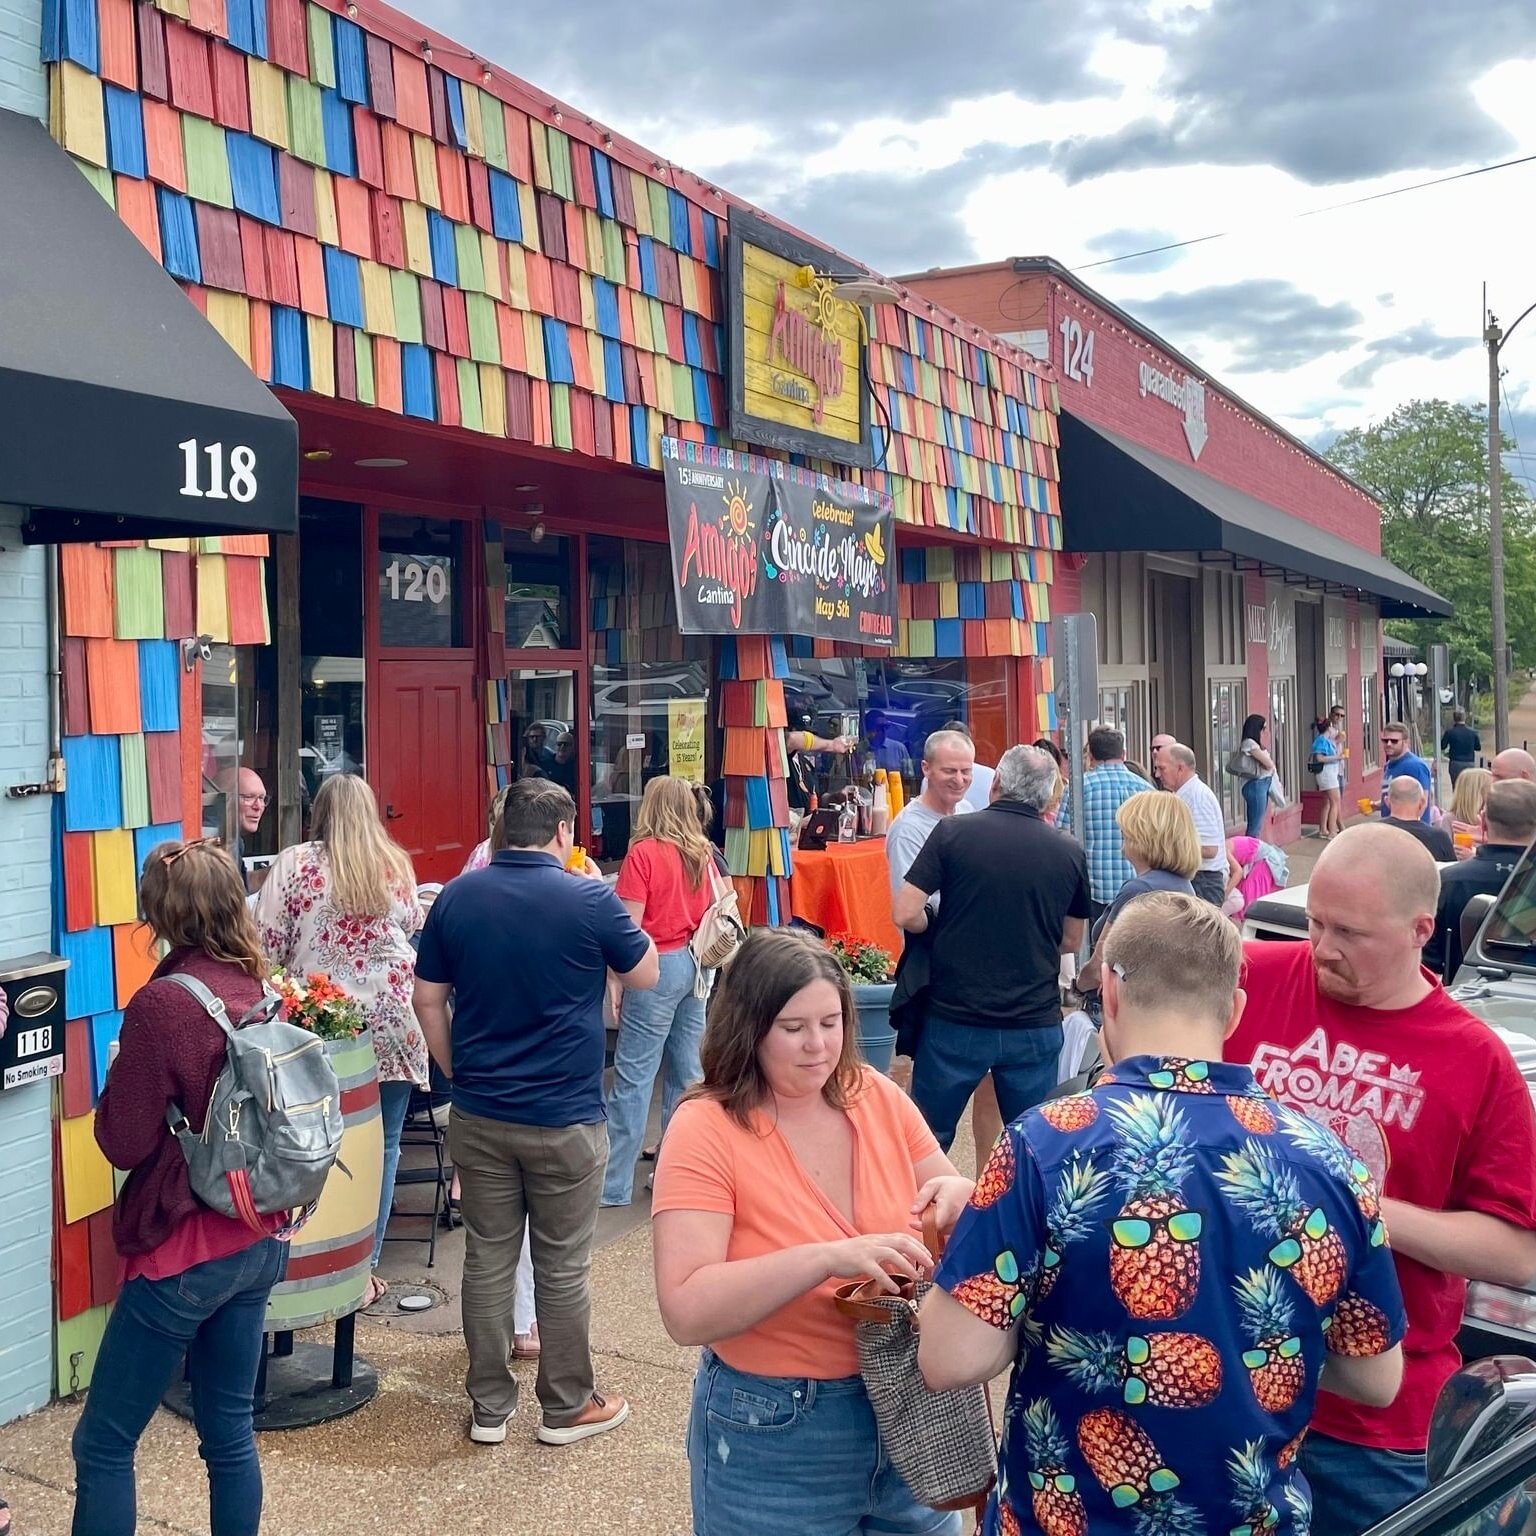 We wanted to say a big THANK YOU to everyone who joined us for our 15th Cinco De Mayo this year. We love what we do here at Amigos and we appreciate you choosing to celebrate with us! Cheers!